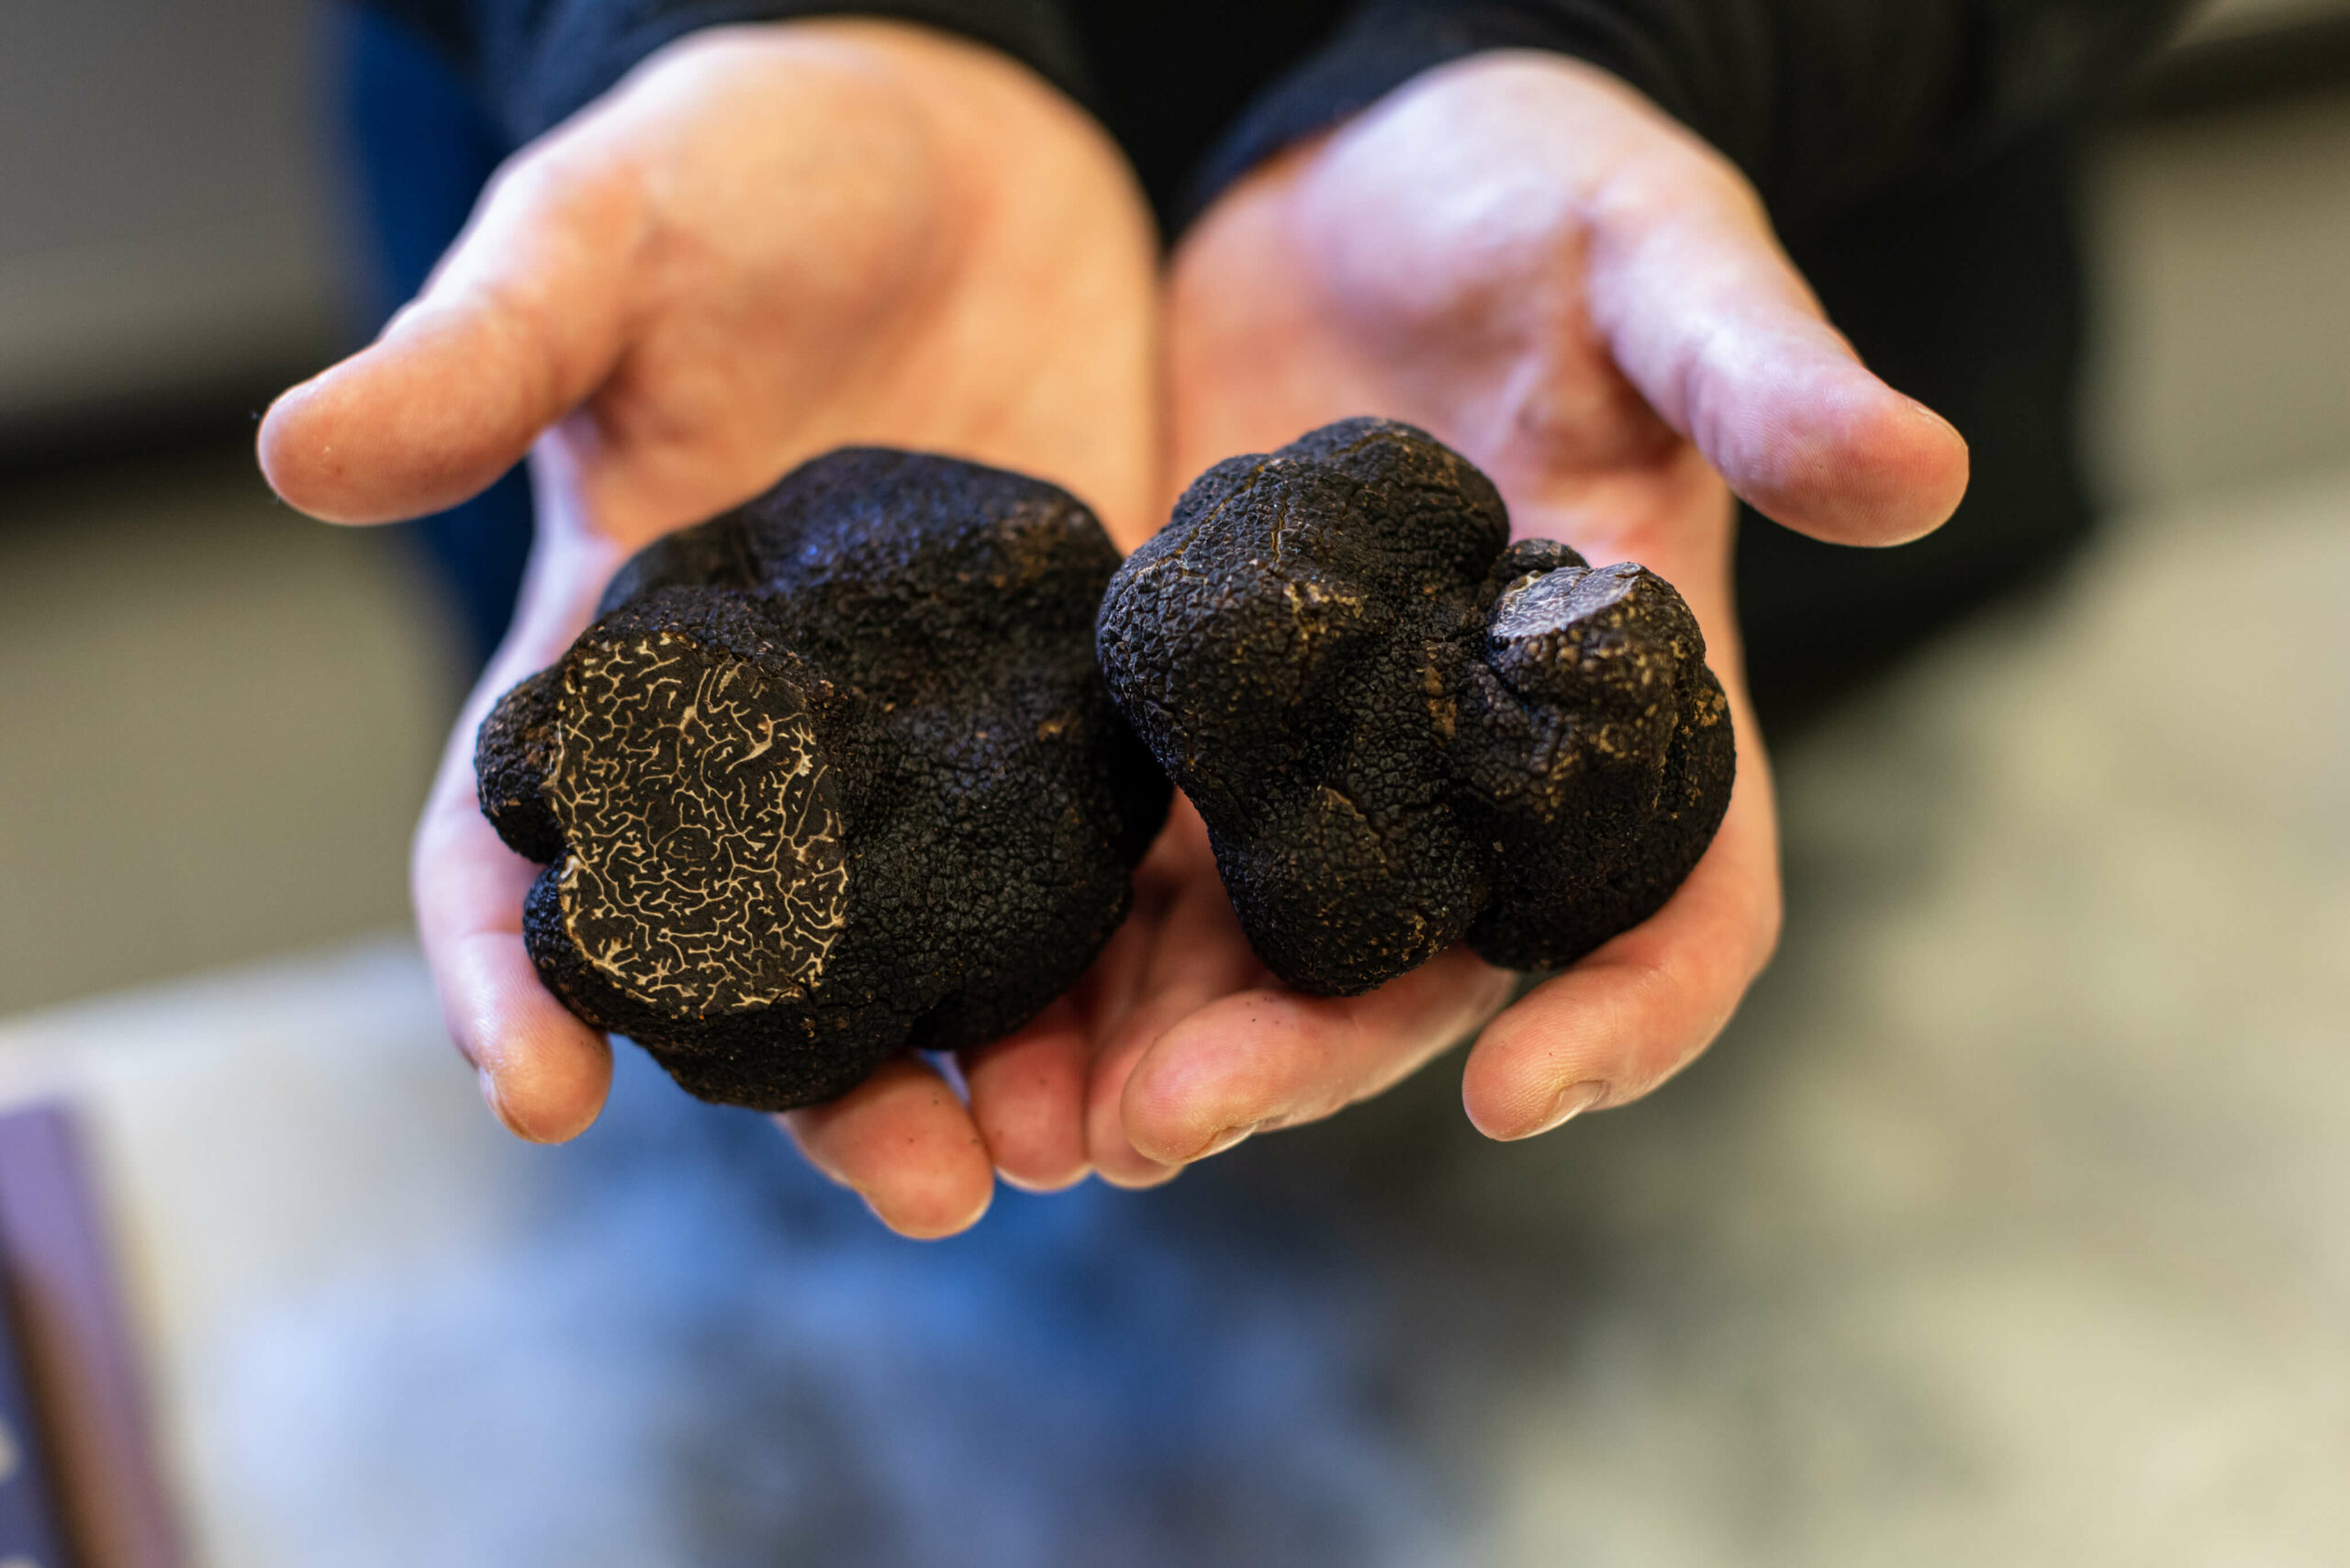 holding truffles in hands